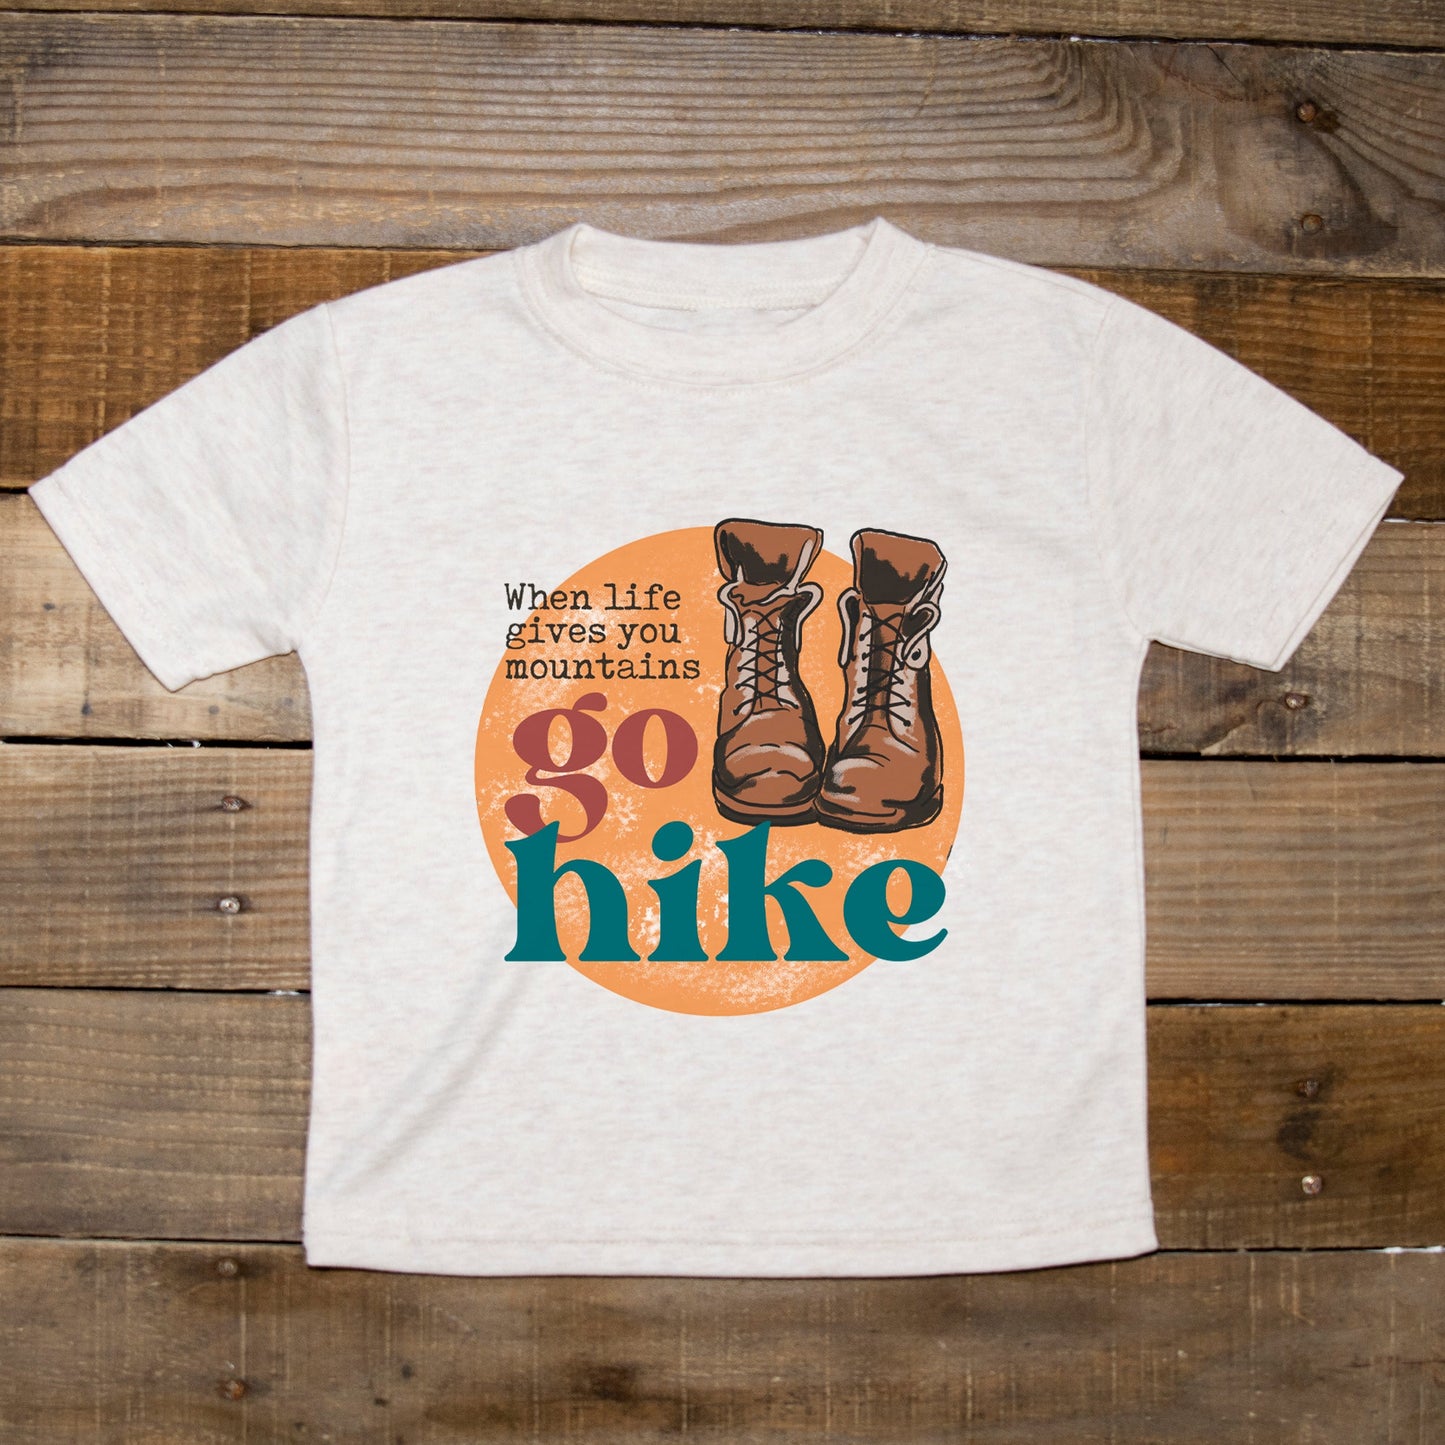 "When life gives you mountains go hike" Soft Beige Youth/Toddler Tee